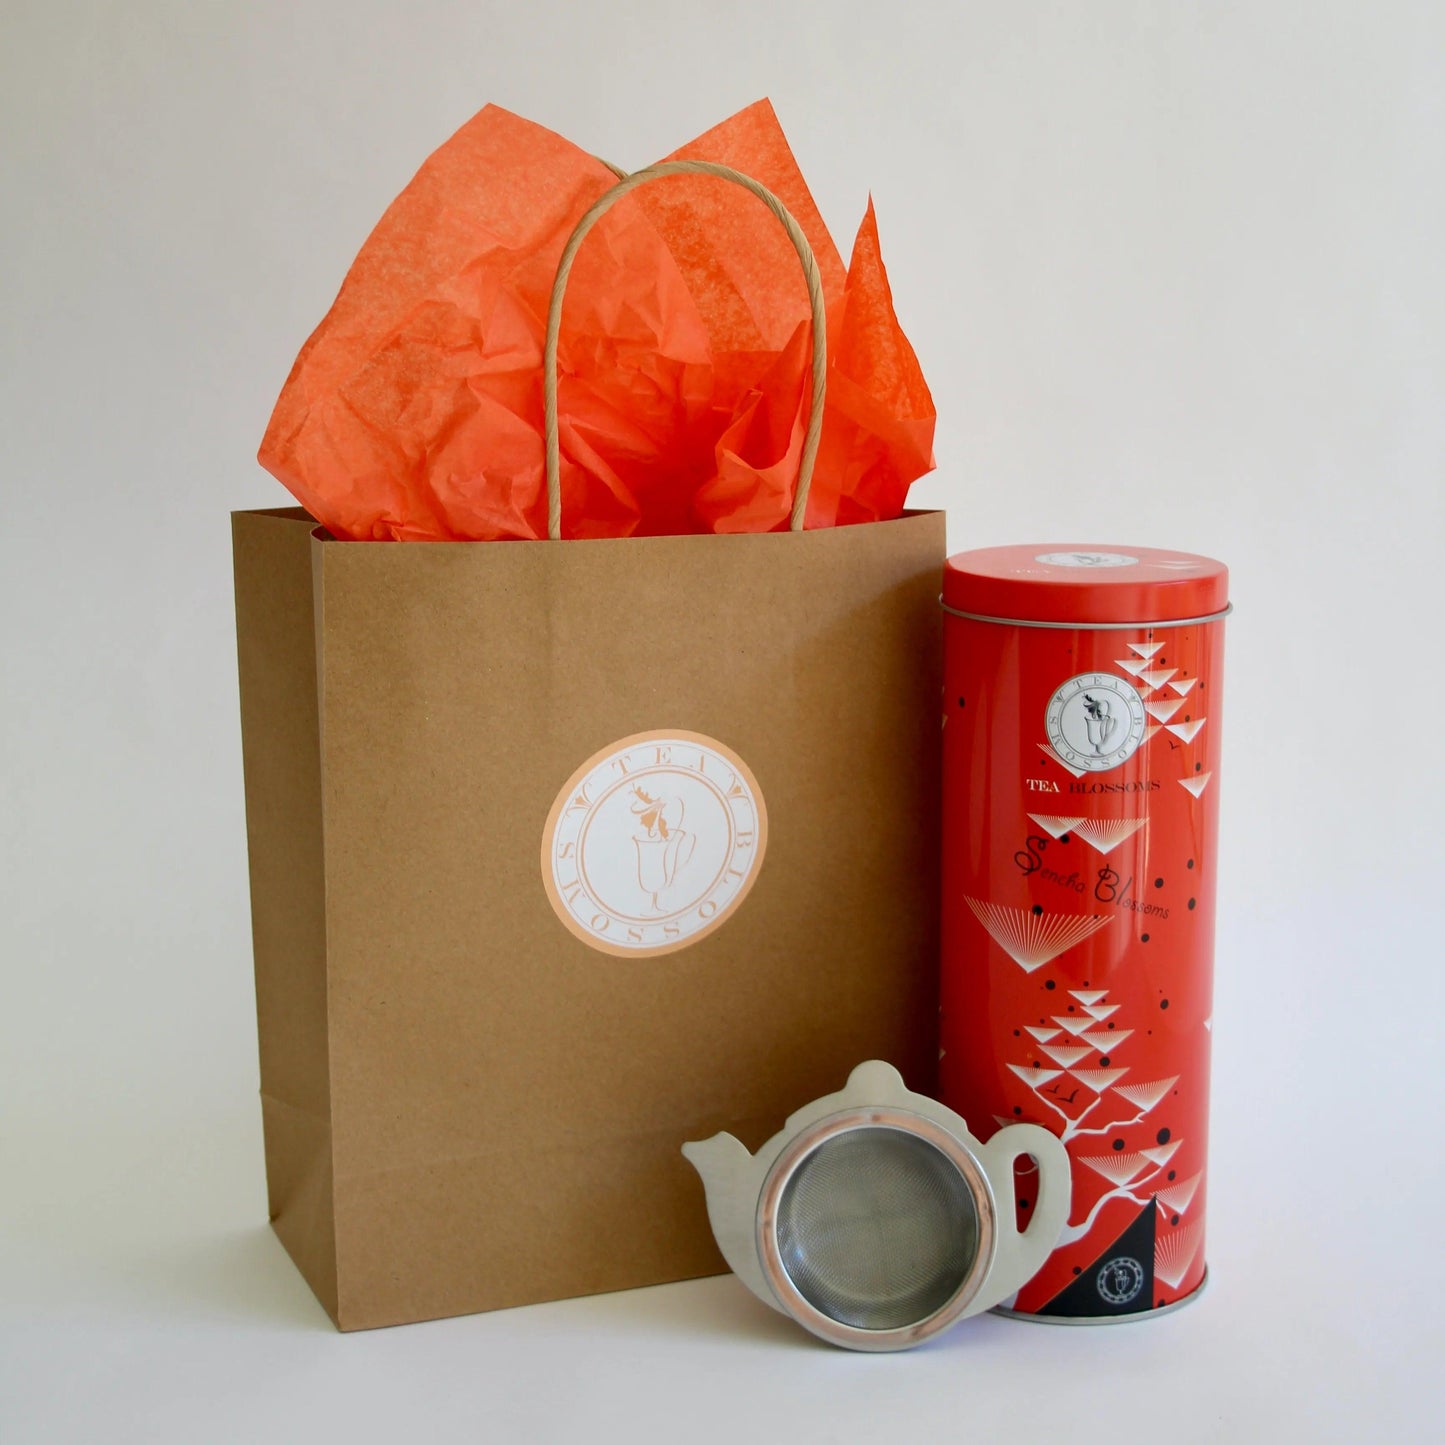 100g Loose Leaf Tea in a Gift Tin and with a Teapot-Shaped Tea Strainer